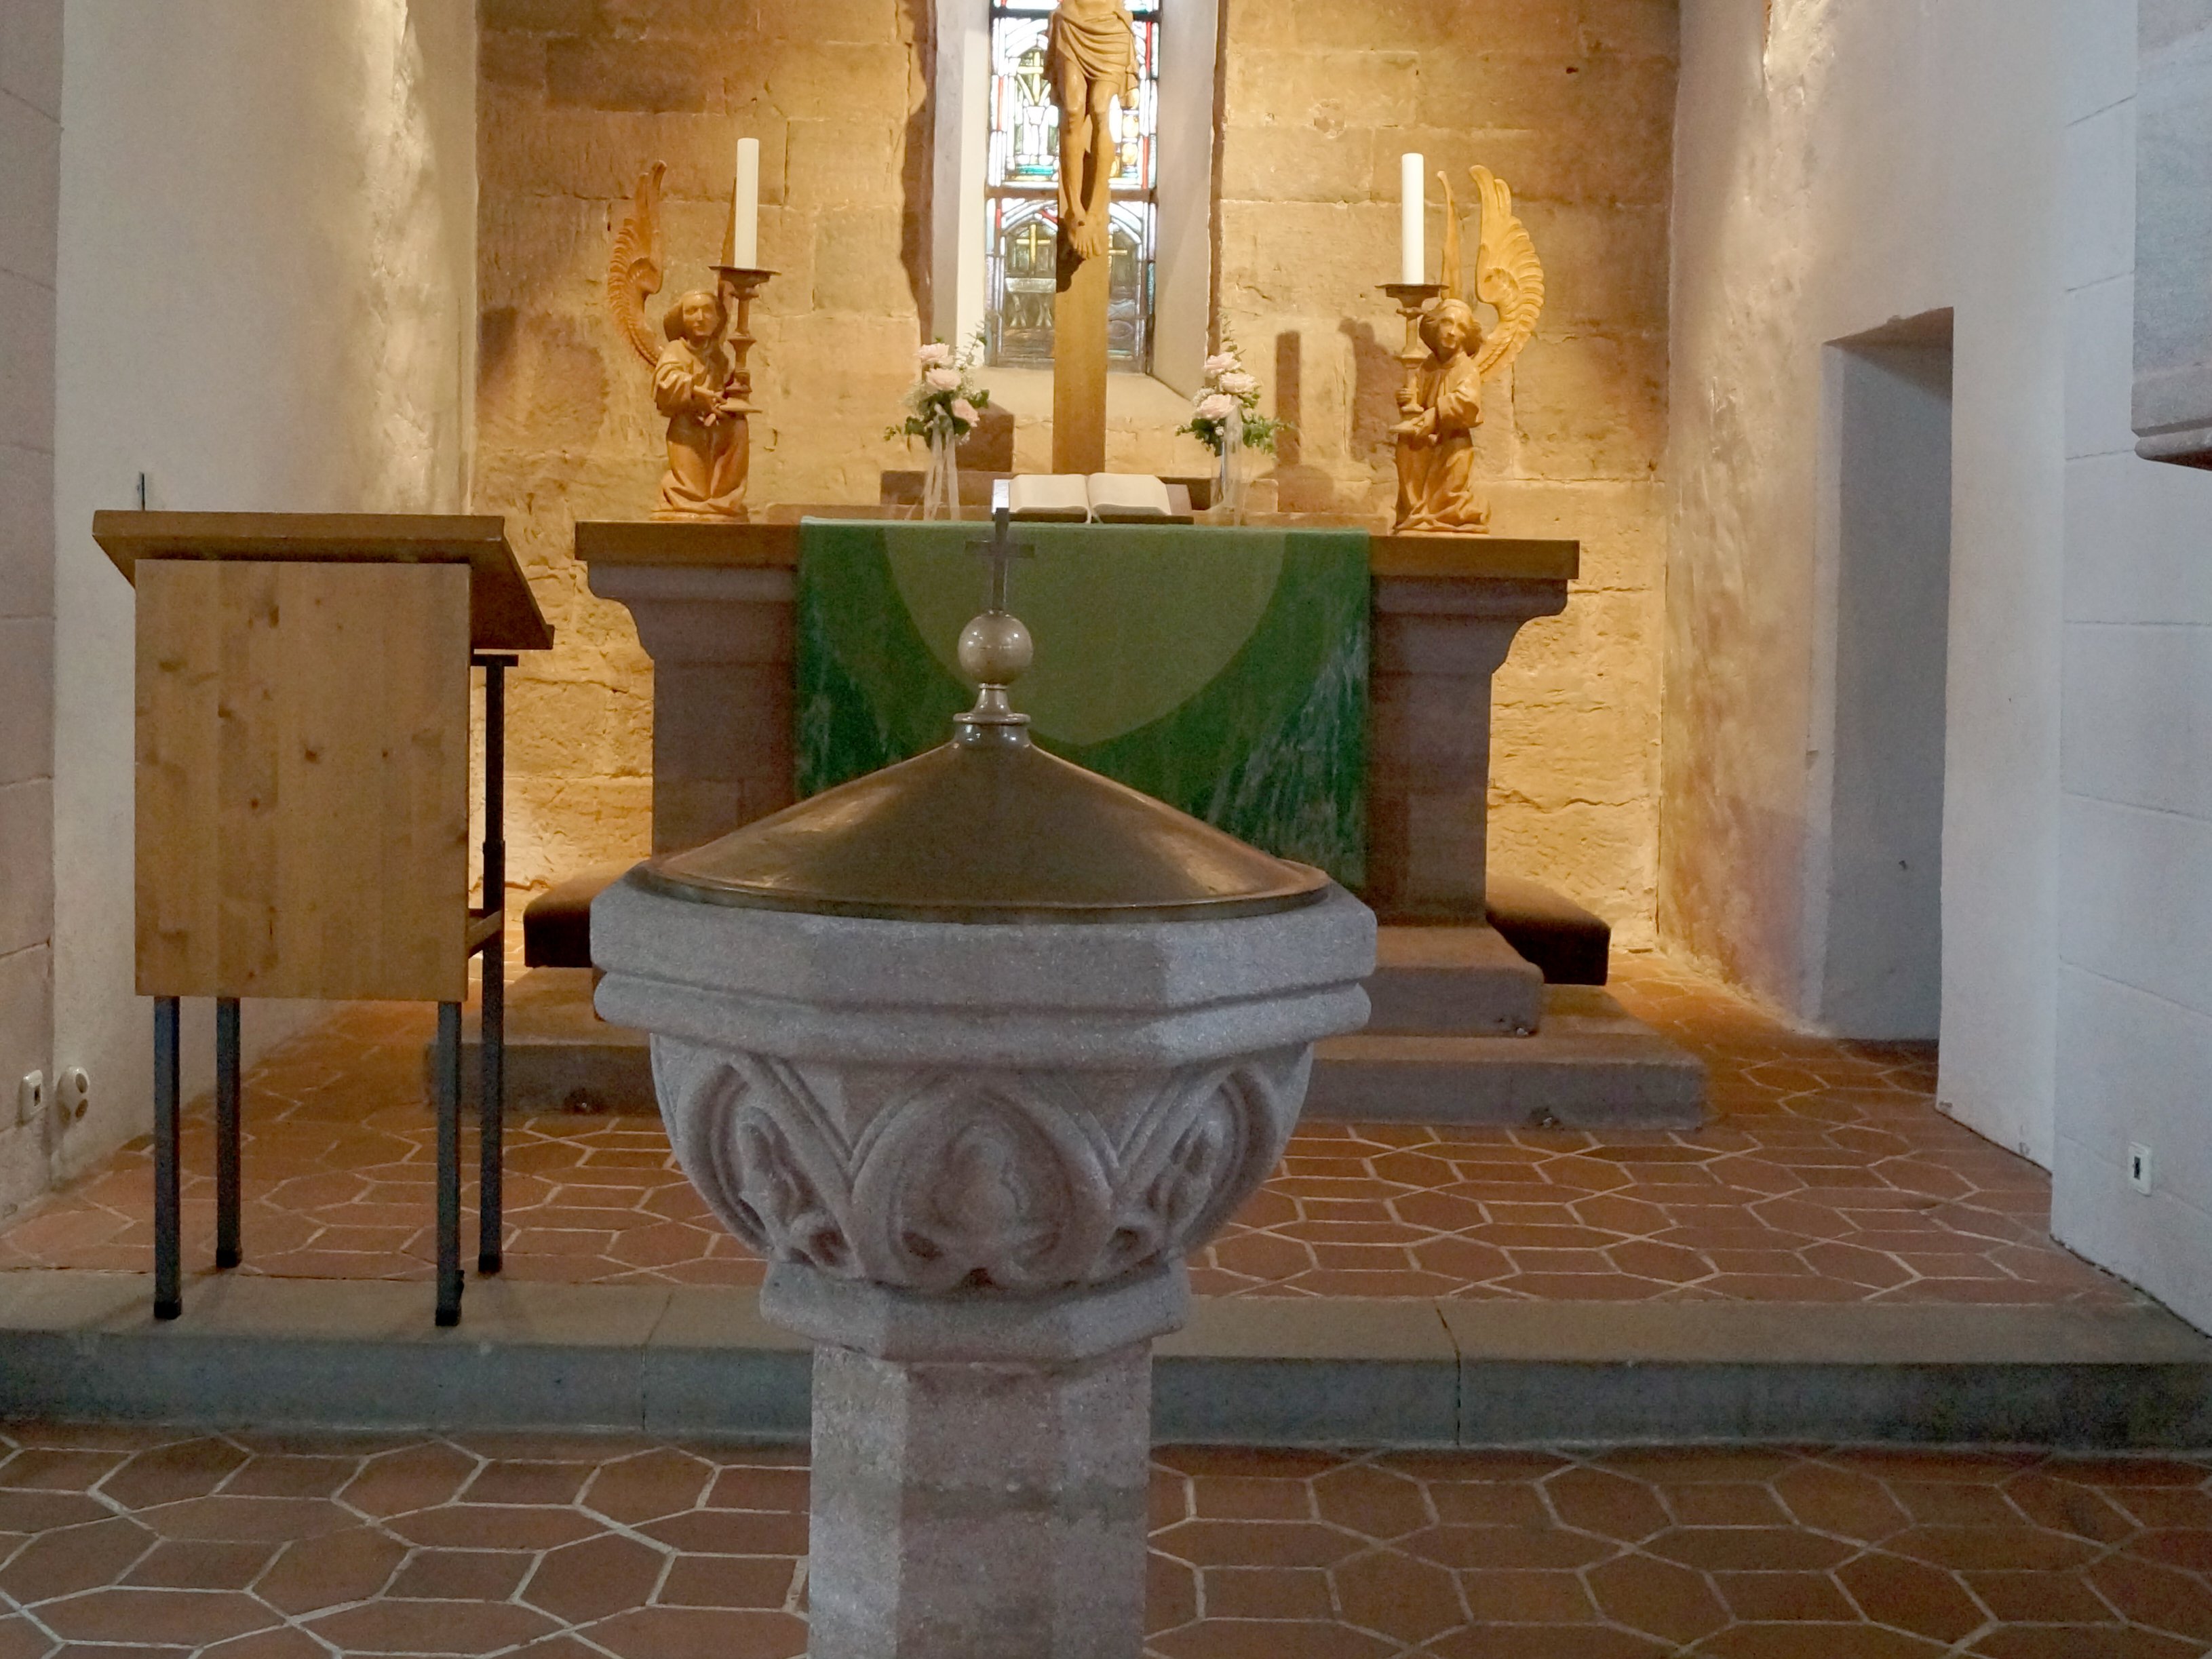 Interior view of the baptismal font of the Protestant Church St James